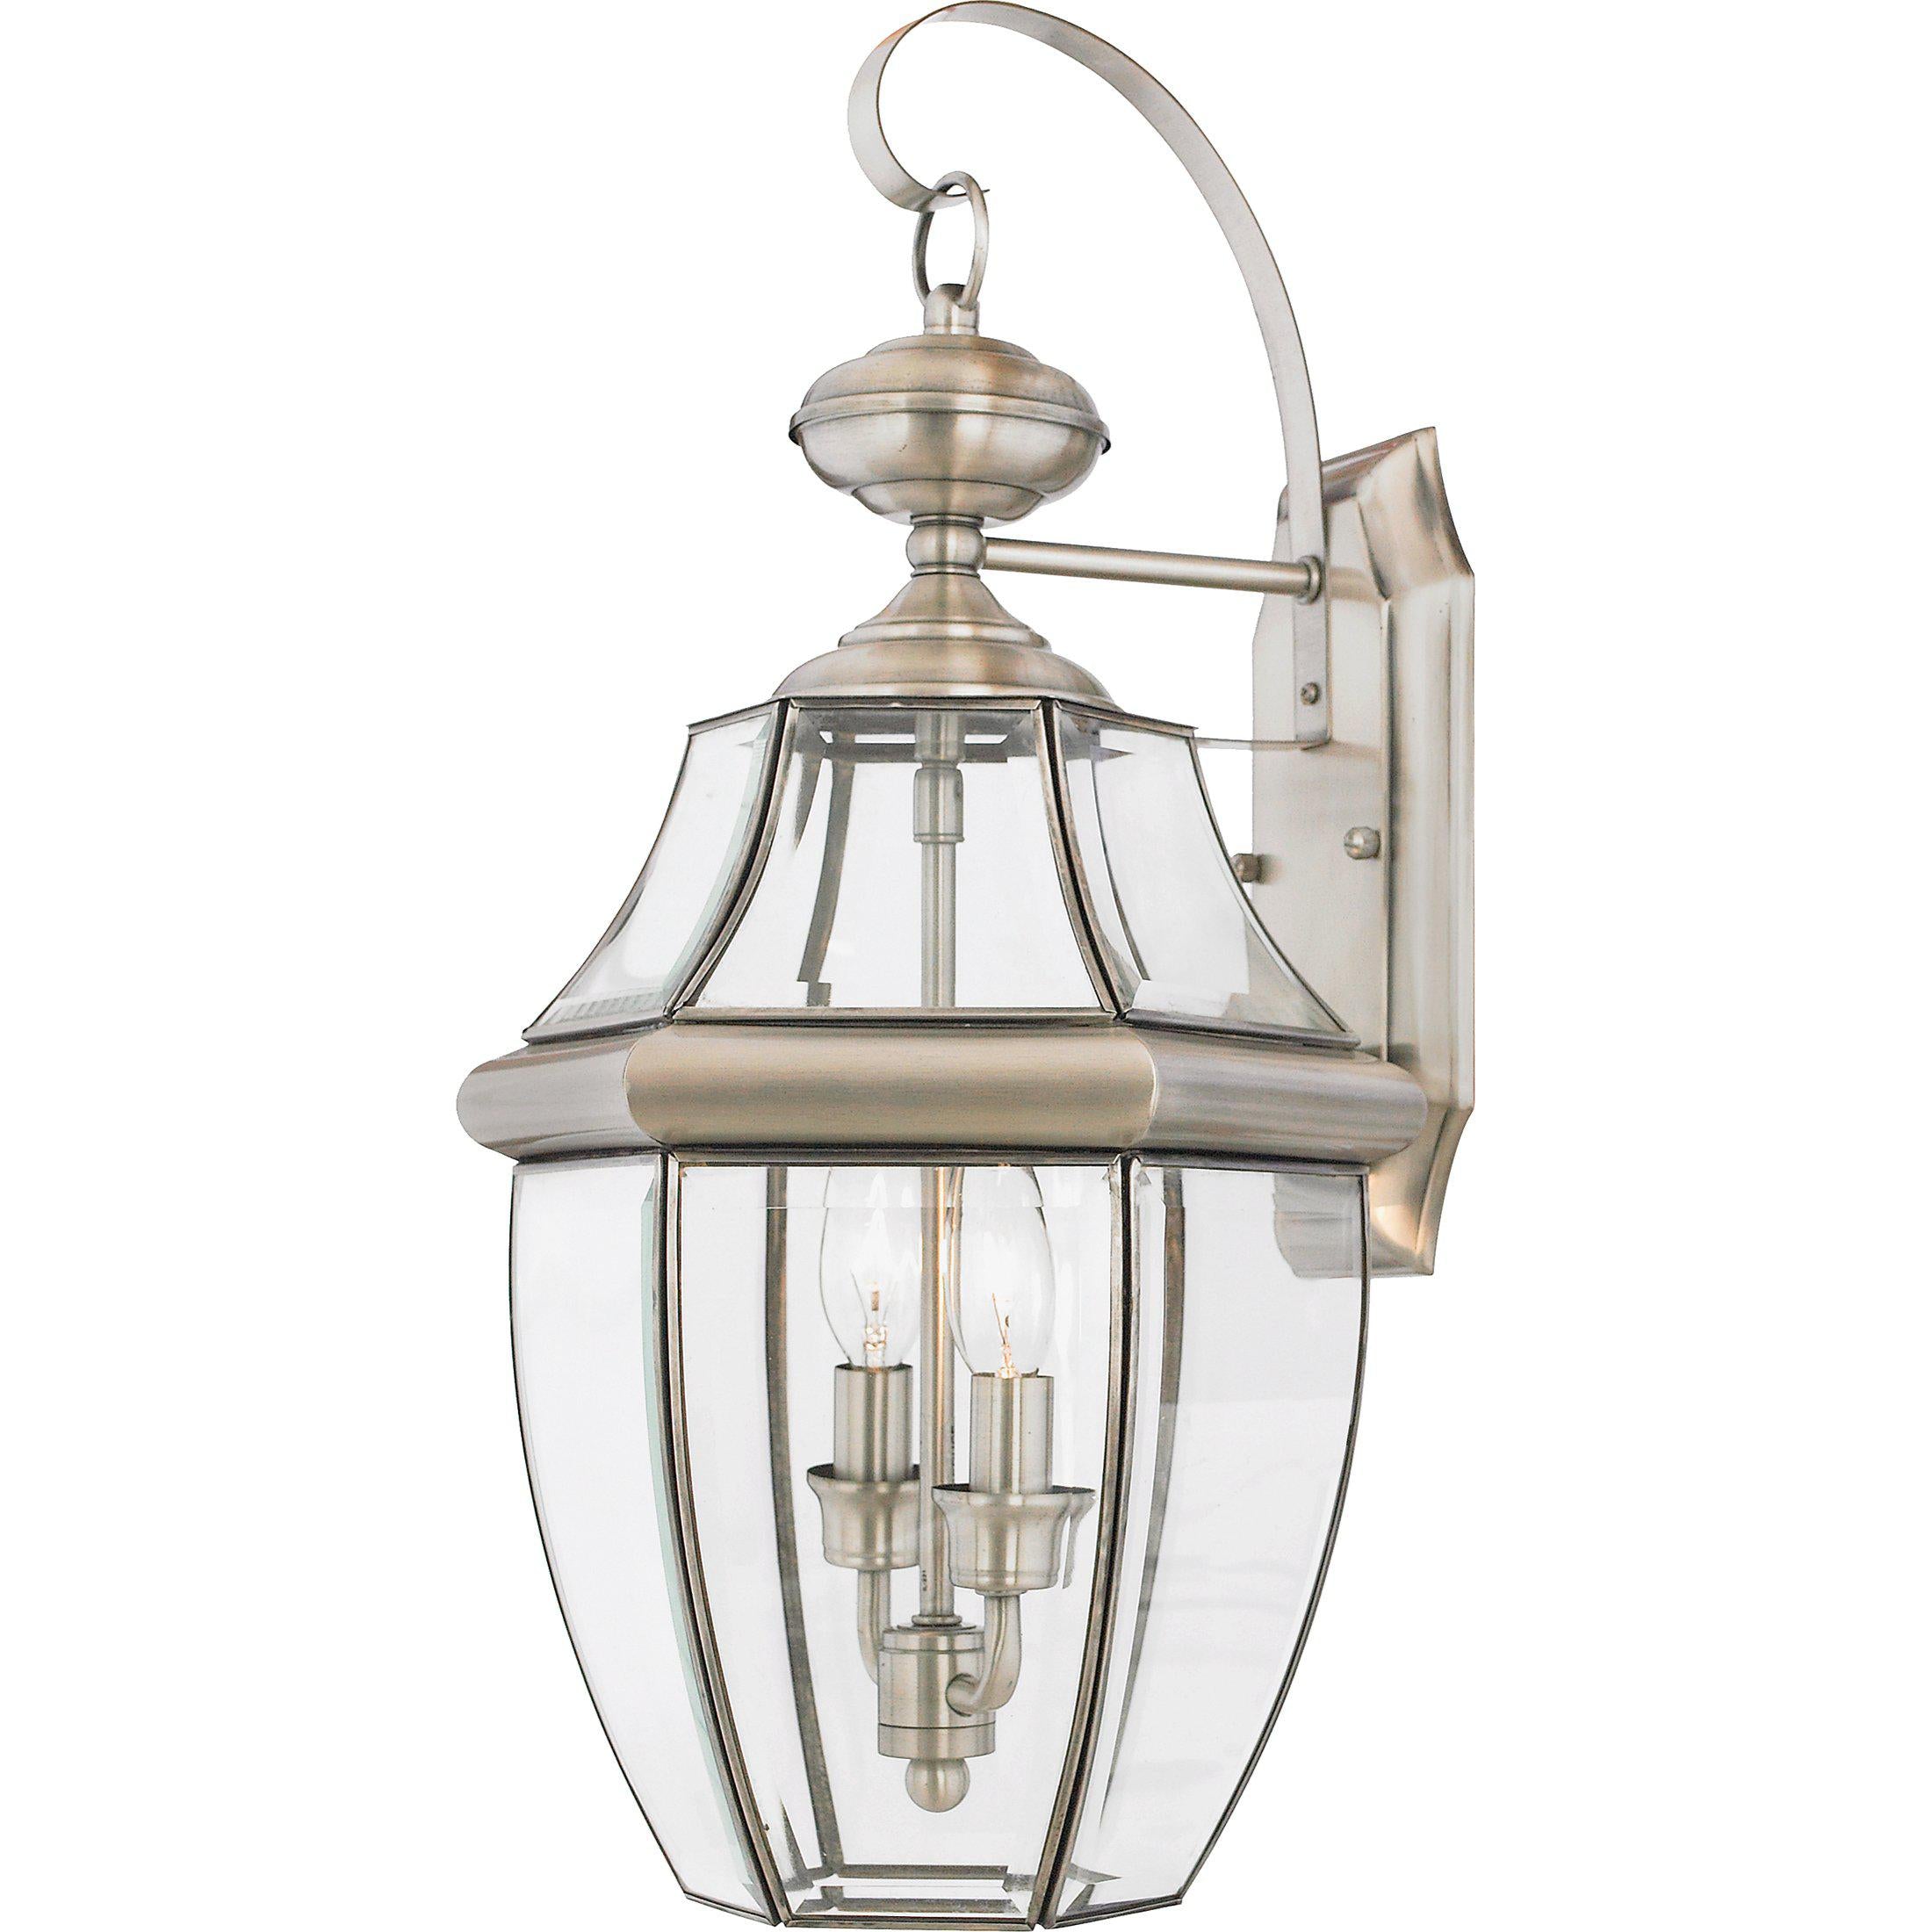 Quoizel  Newbury Outdoor Lantern, Large Outdoor l Wall Quoizel Pewter  